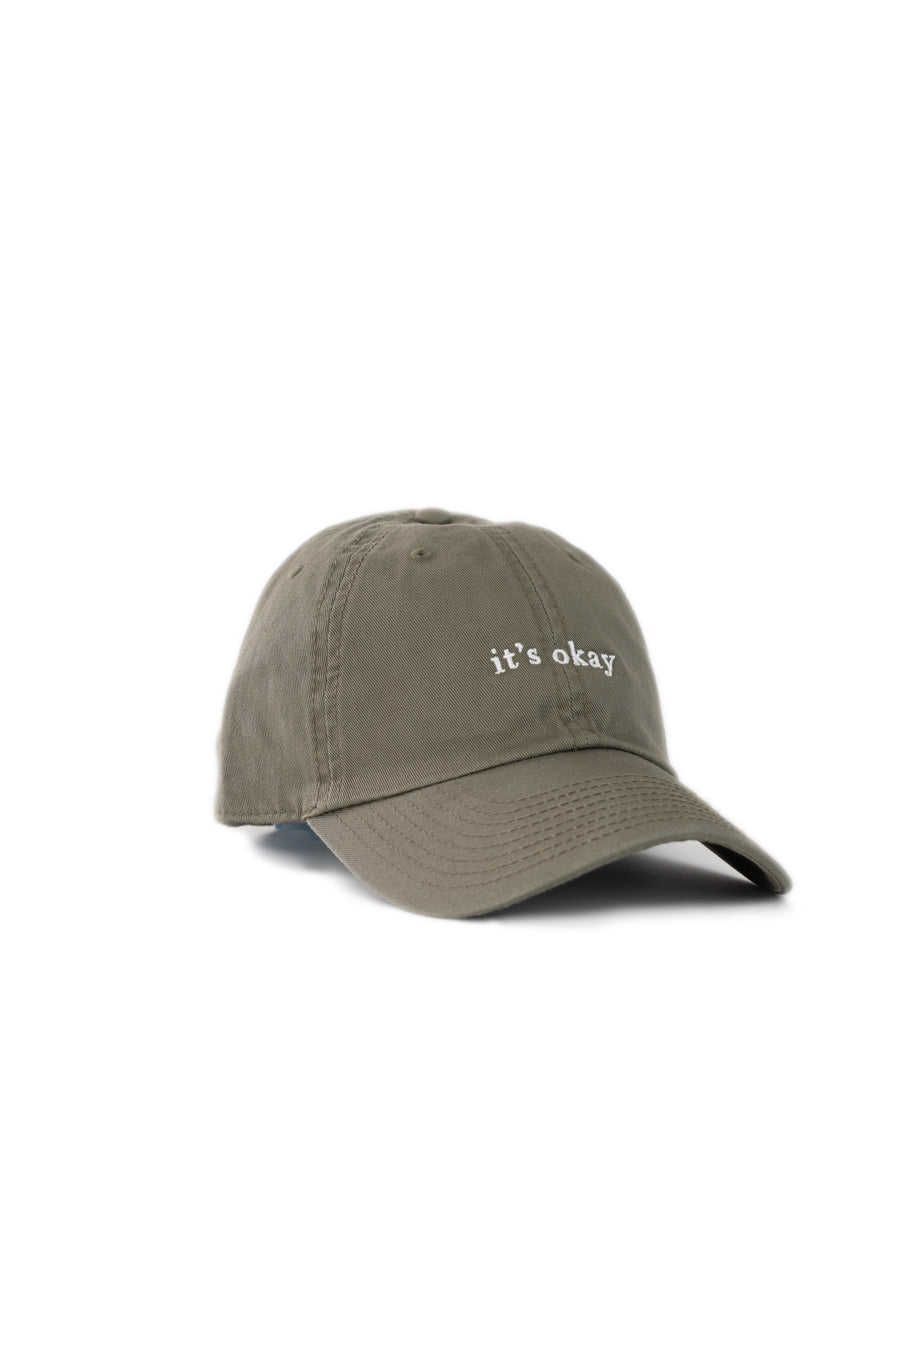 it's okay organic cap green| made with organic cotton, embroidered. This is a studio photography of the cap.